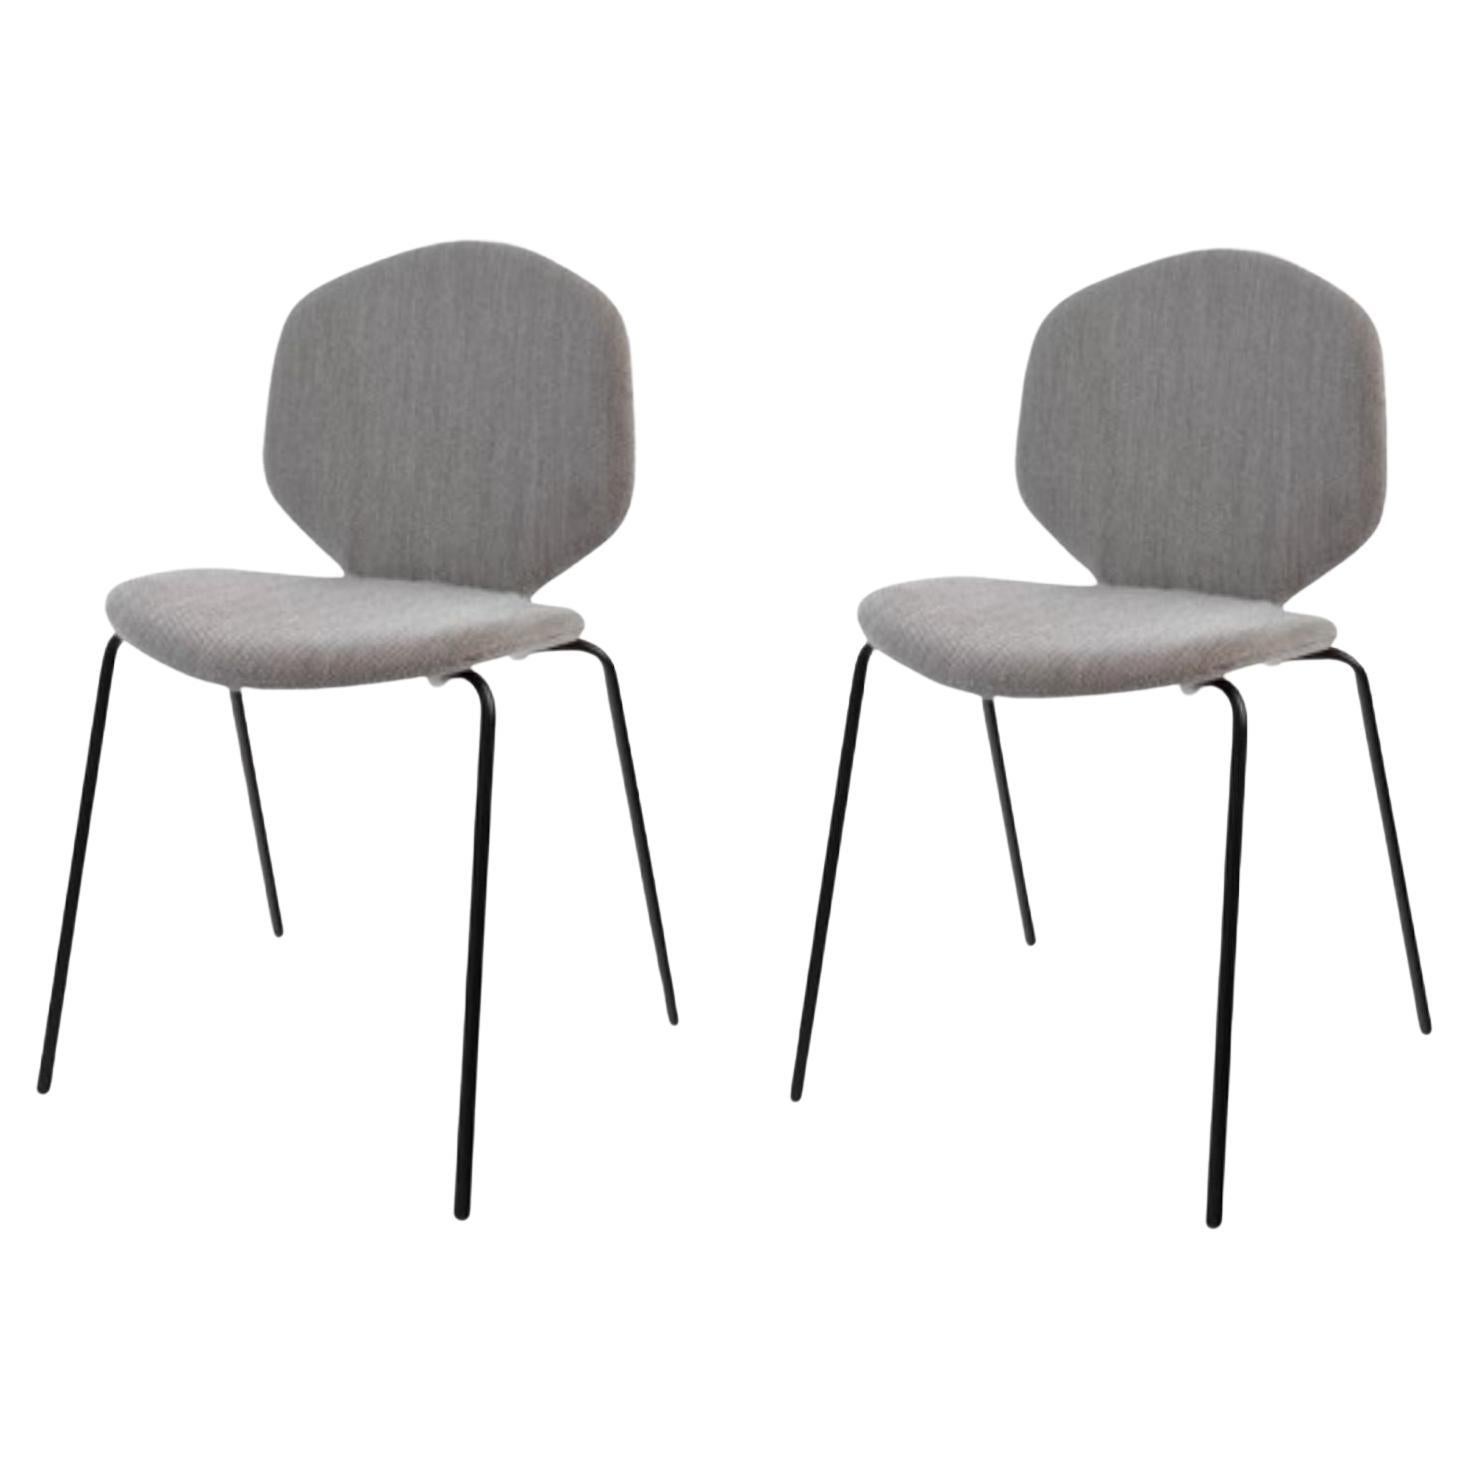 Set of 2 Fabric LouLou Chairs by Shin Azumi For Sale